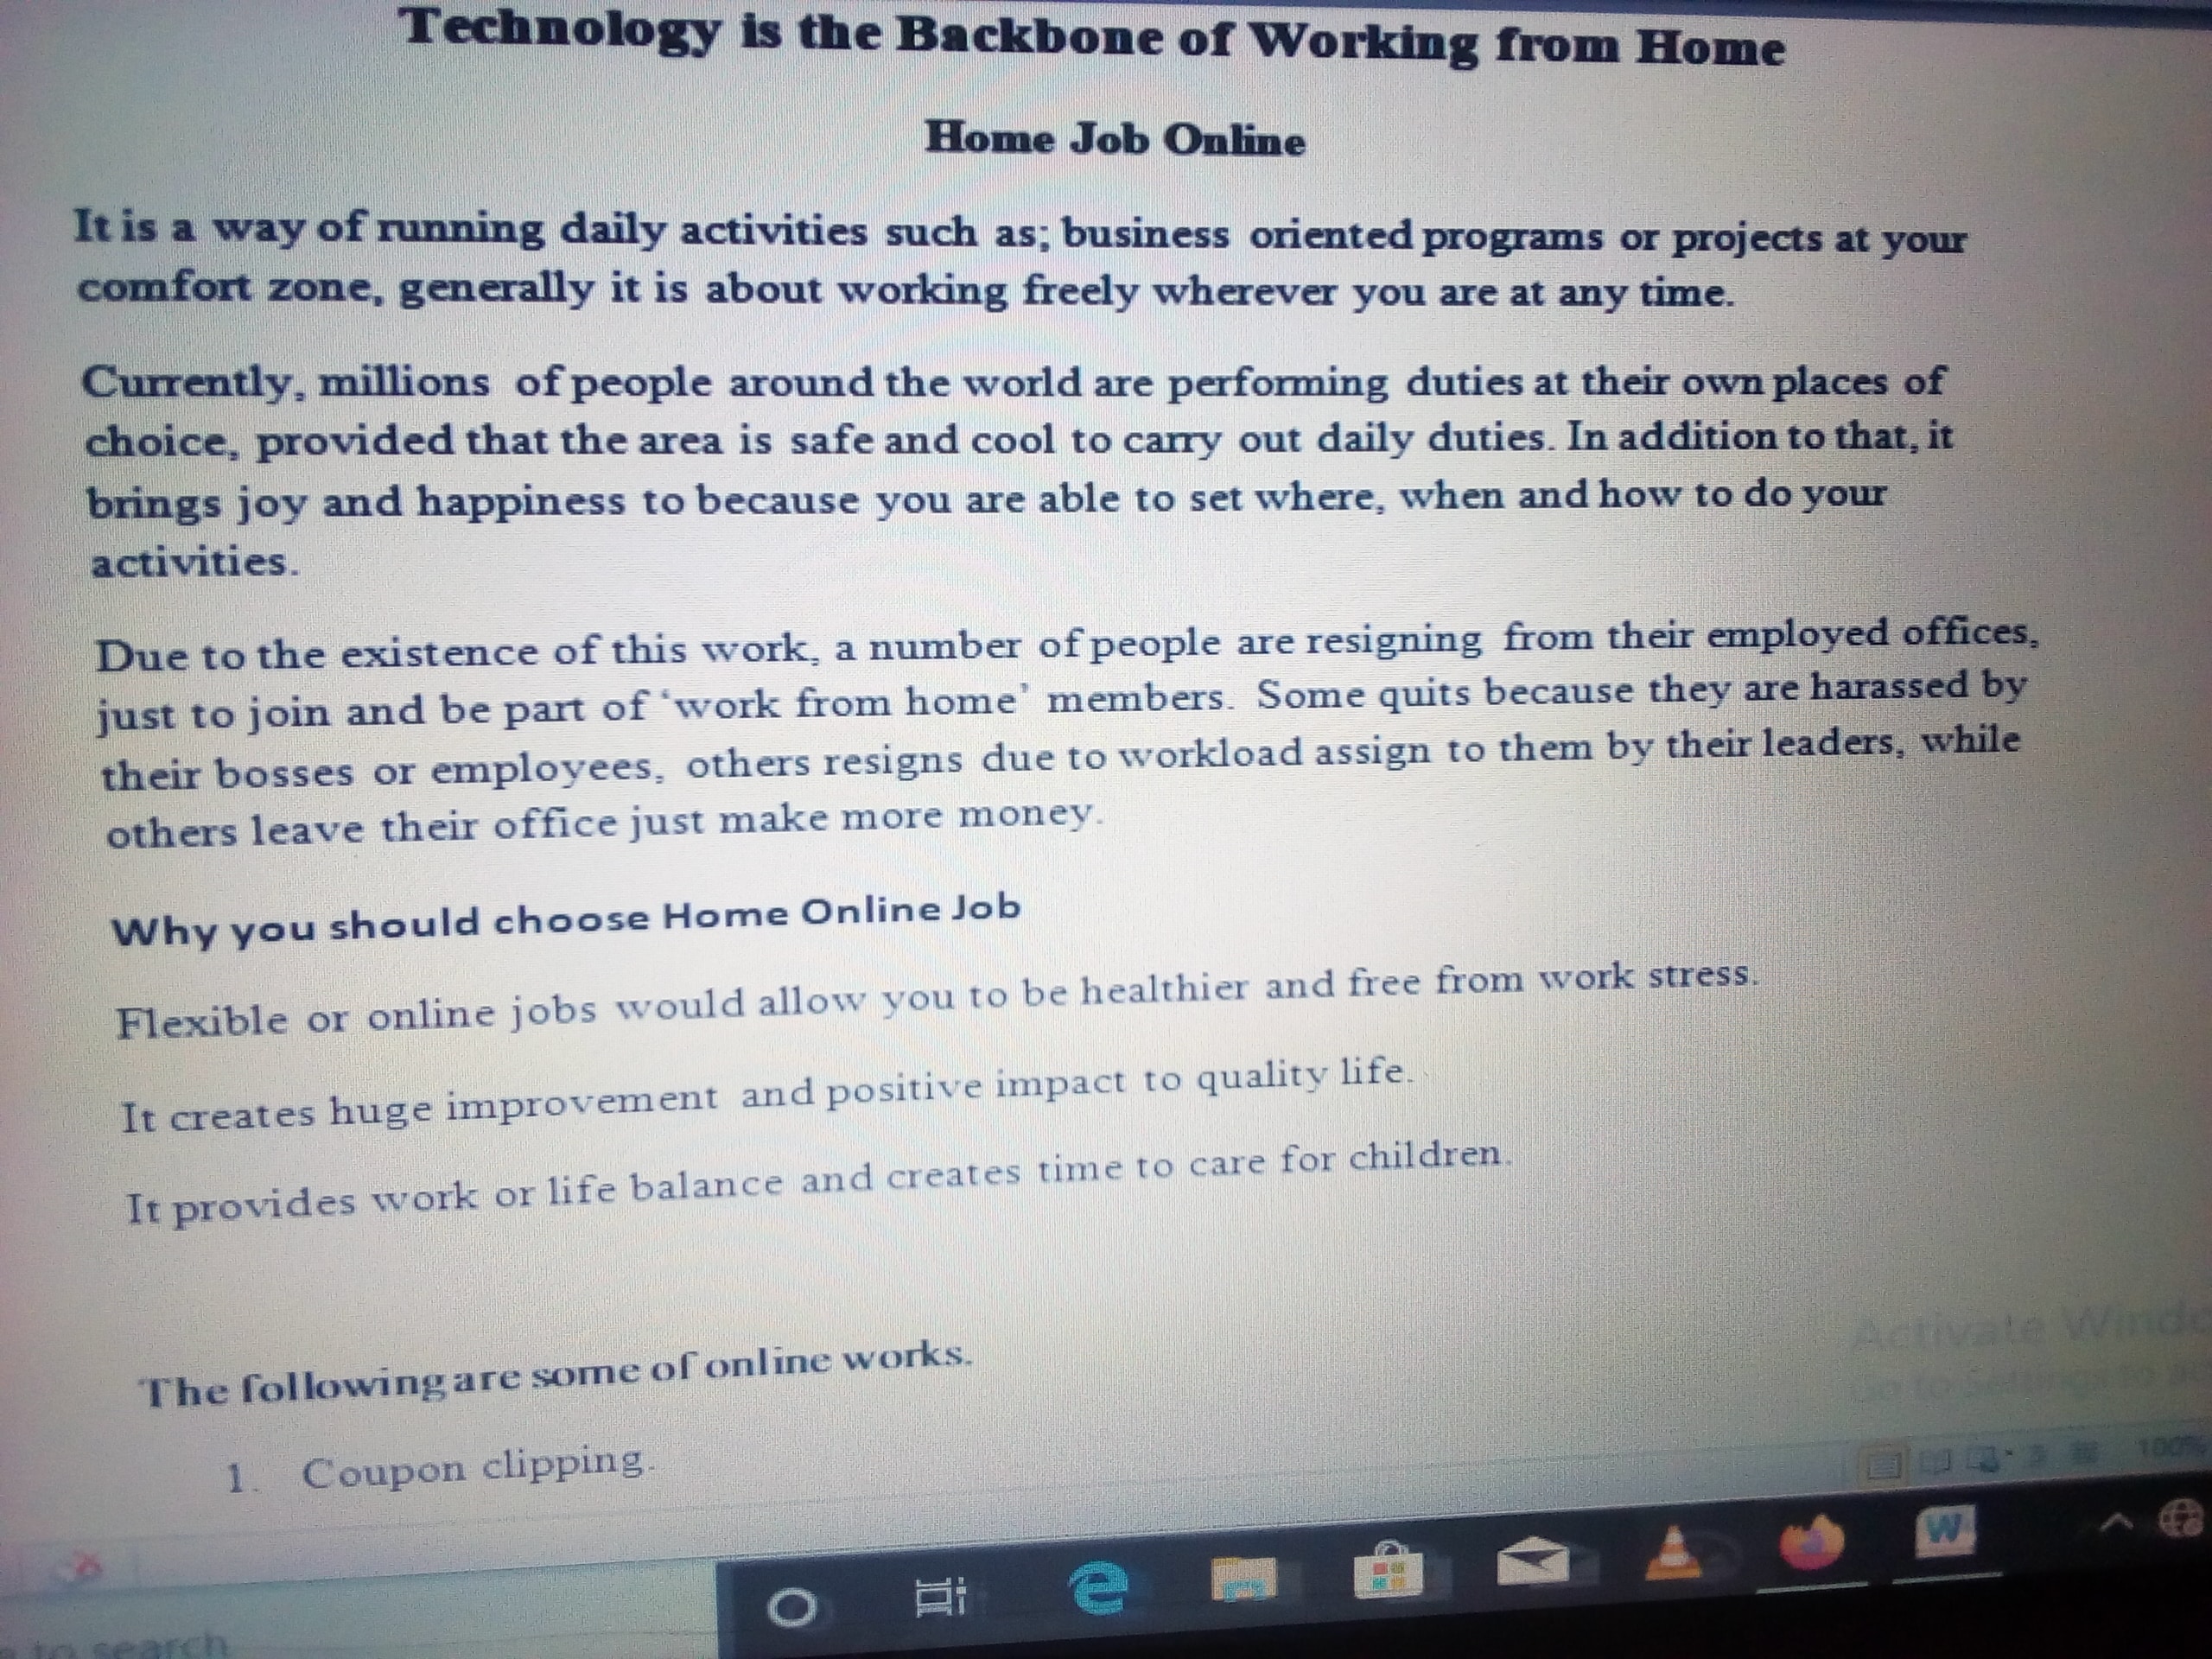 Technoloy Is the Backbone of Working from Home